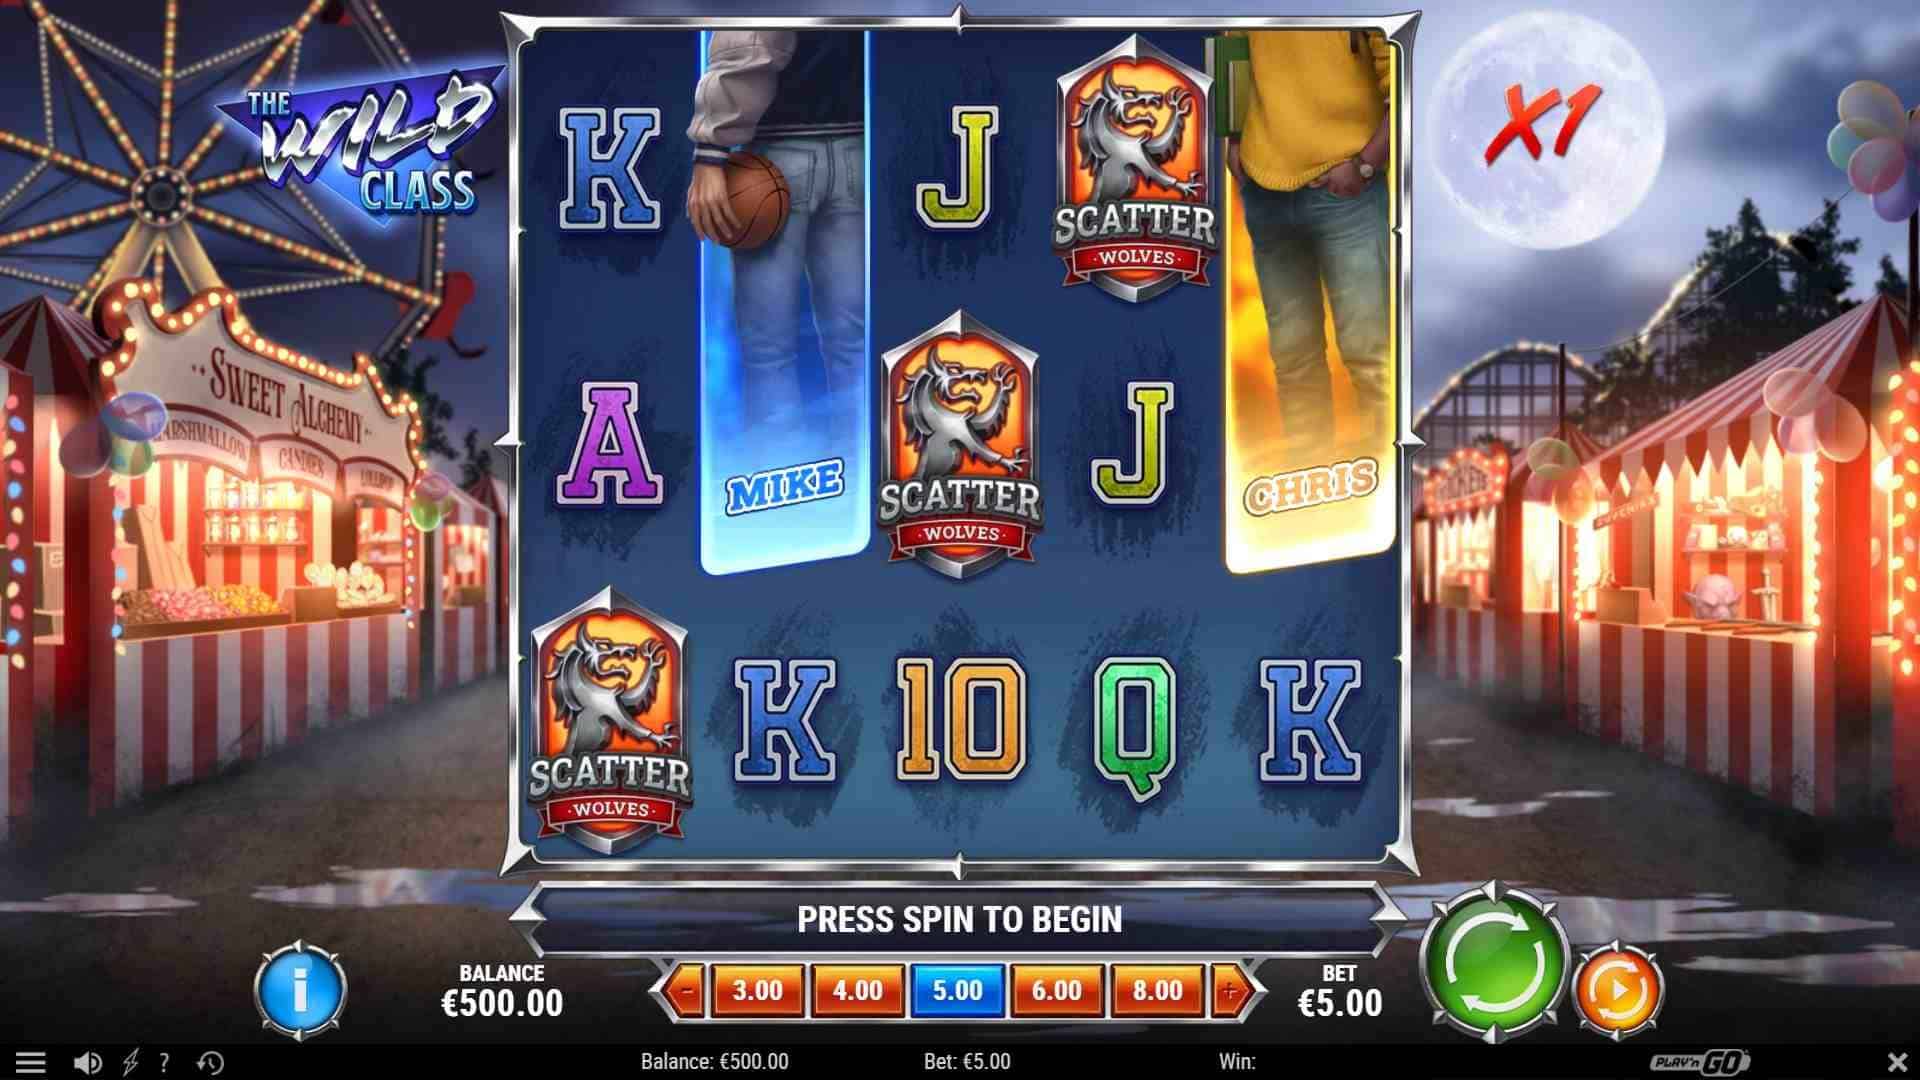 The Wild Class Slot Free Spins